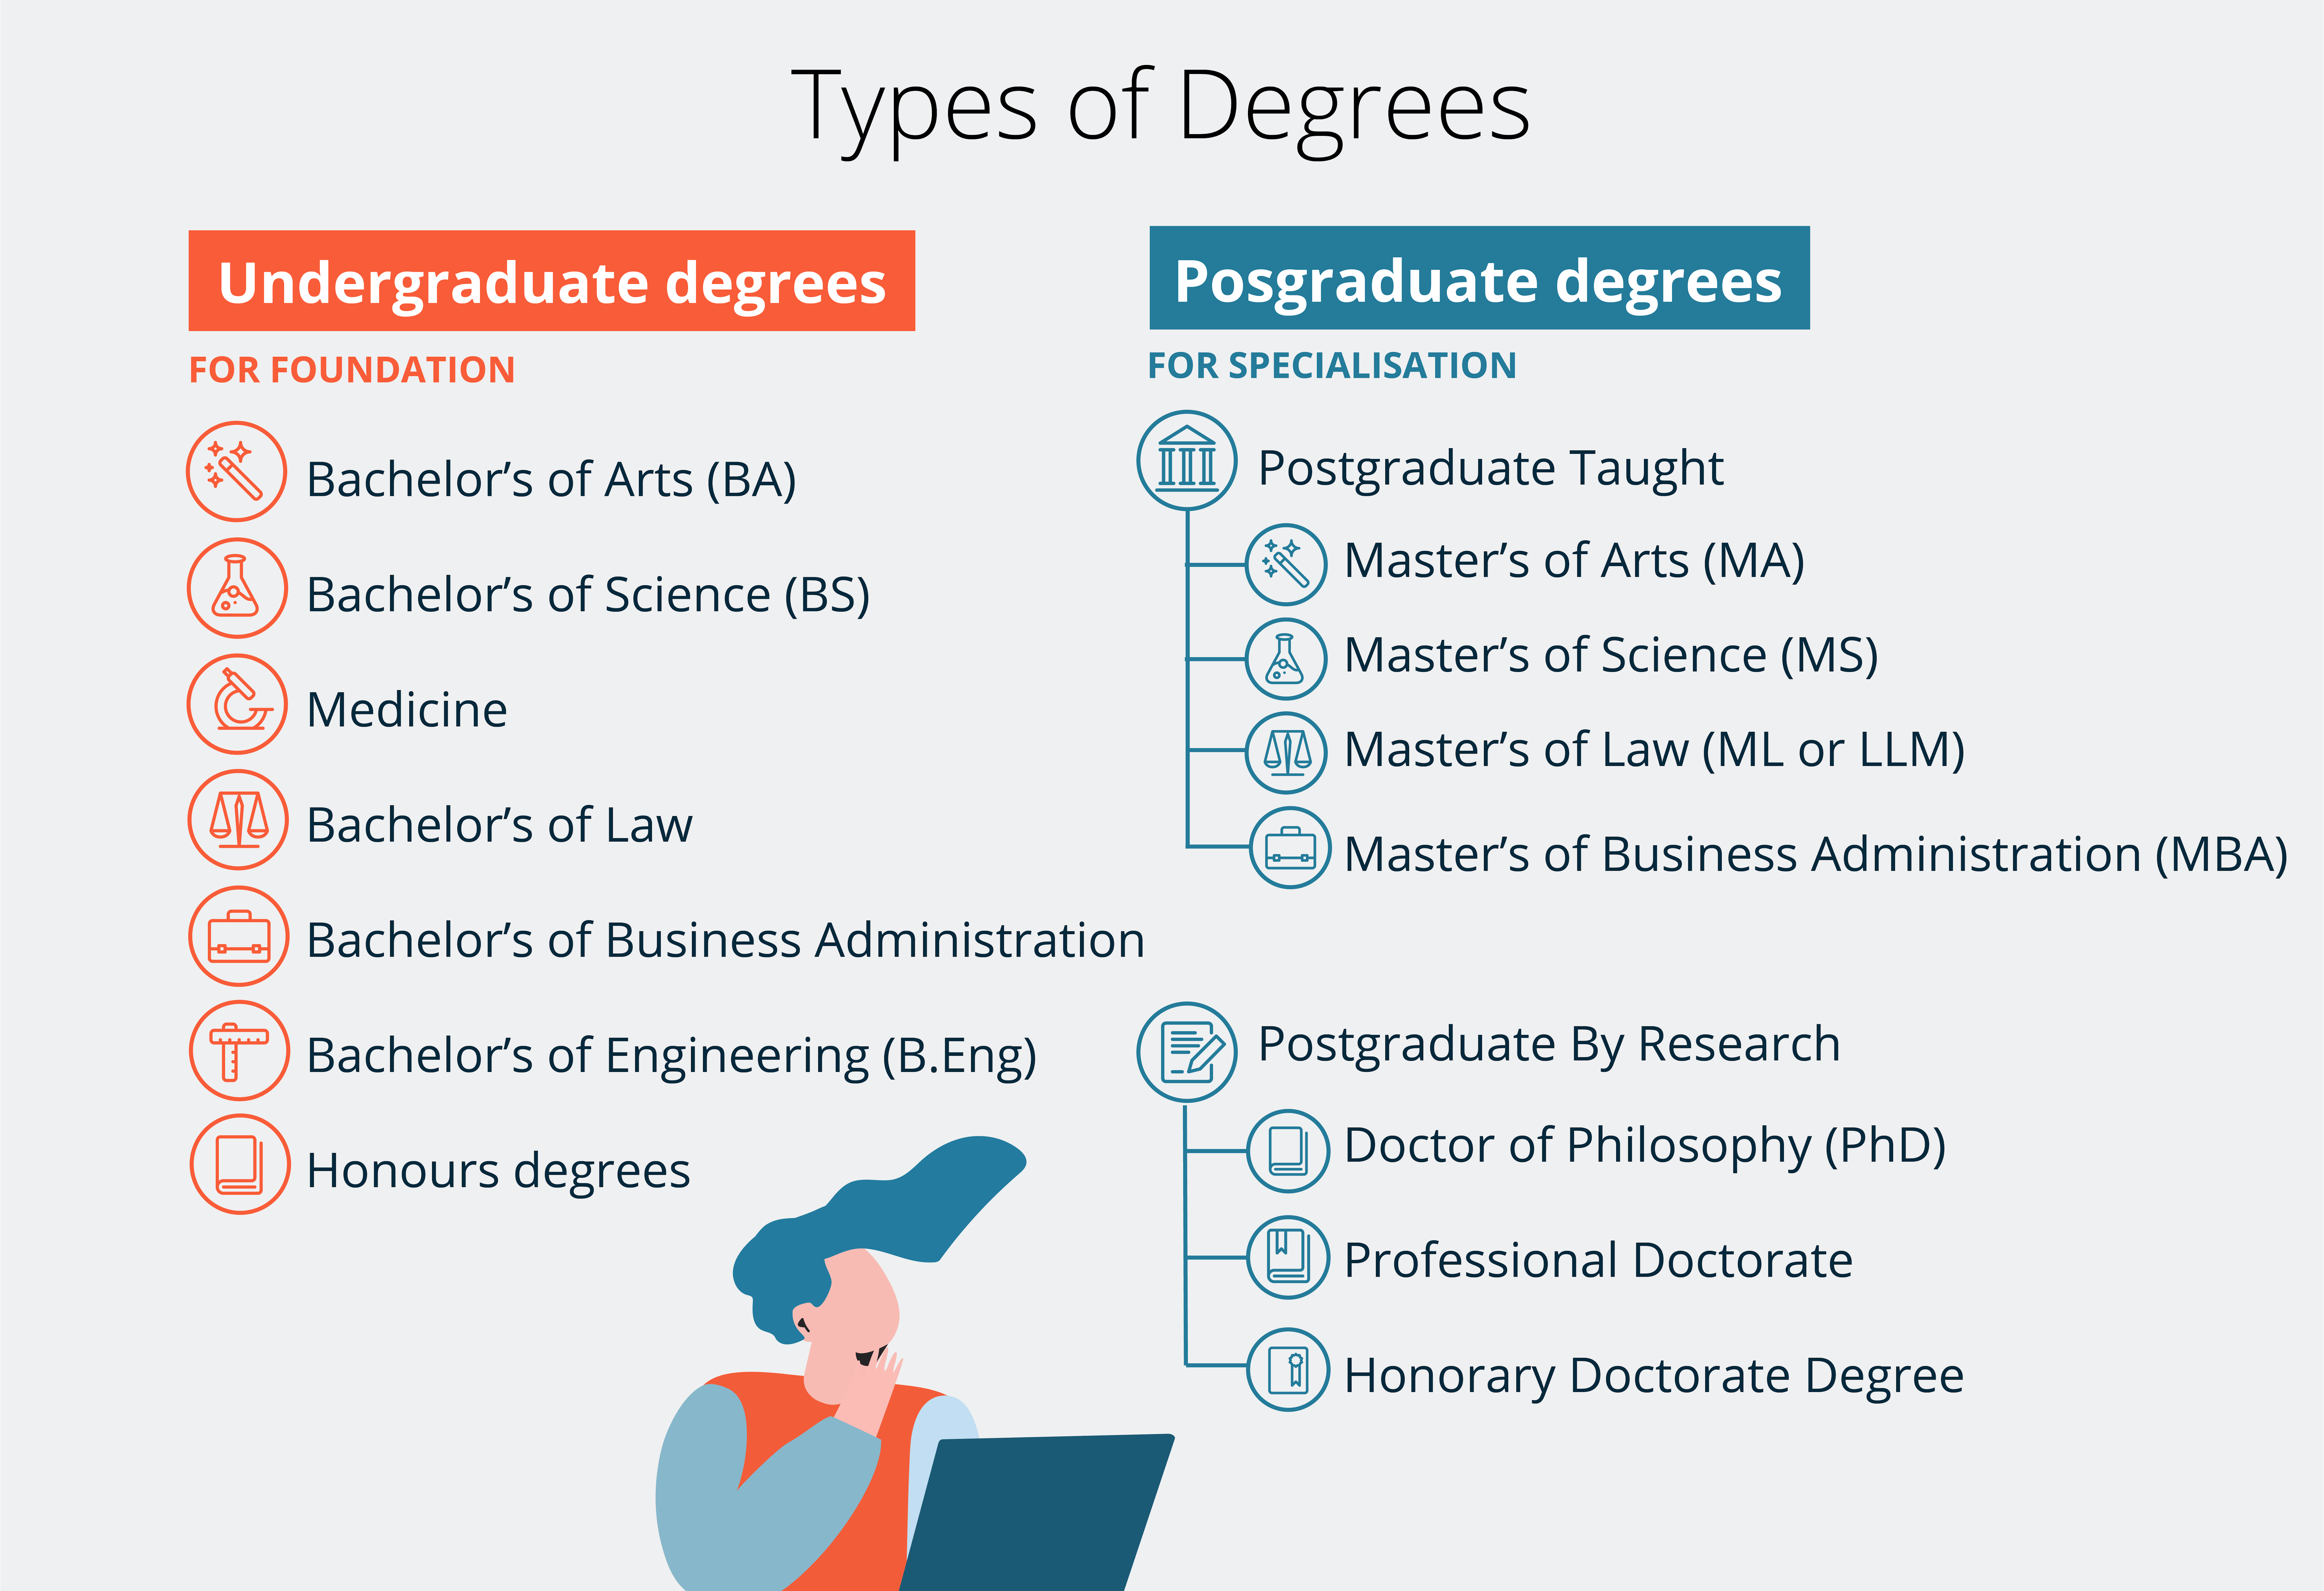 Short guide on the Different Types of Degrees You can Earn after